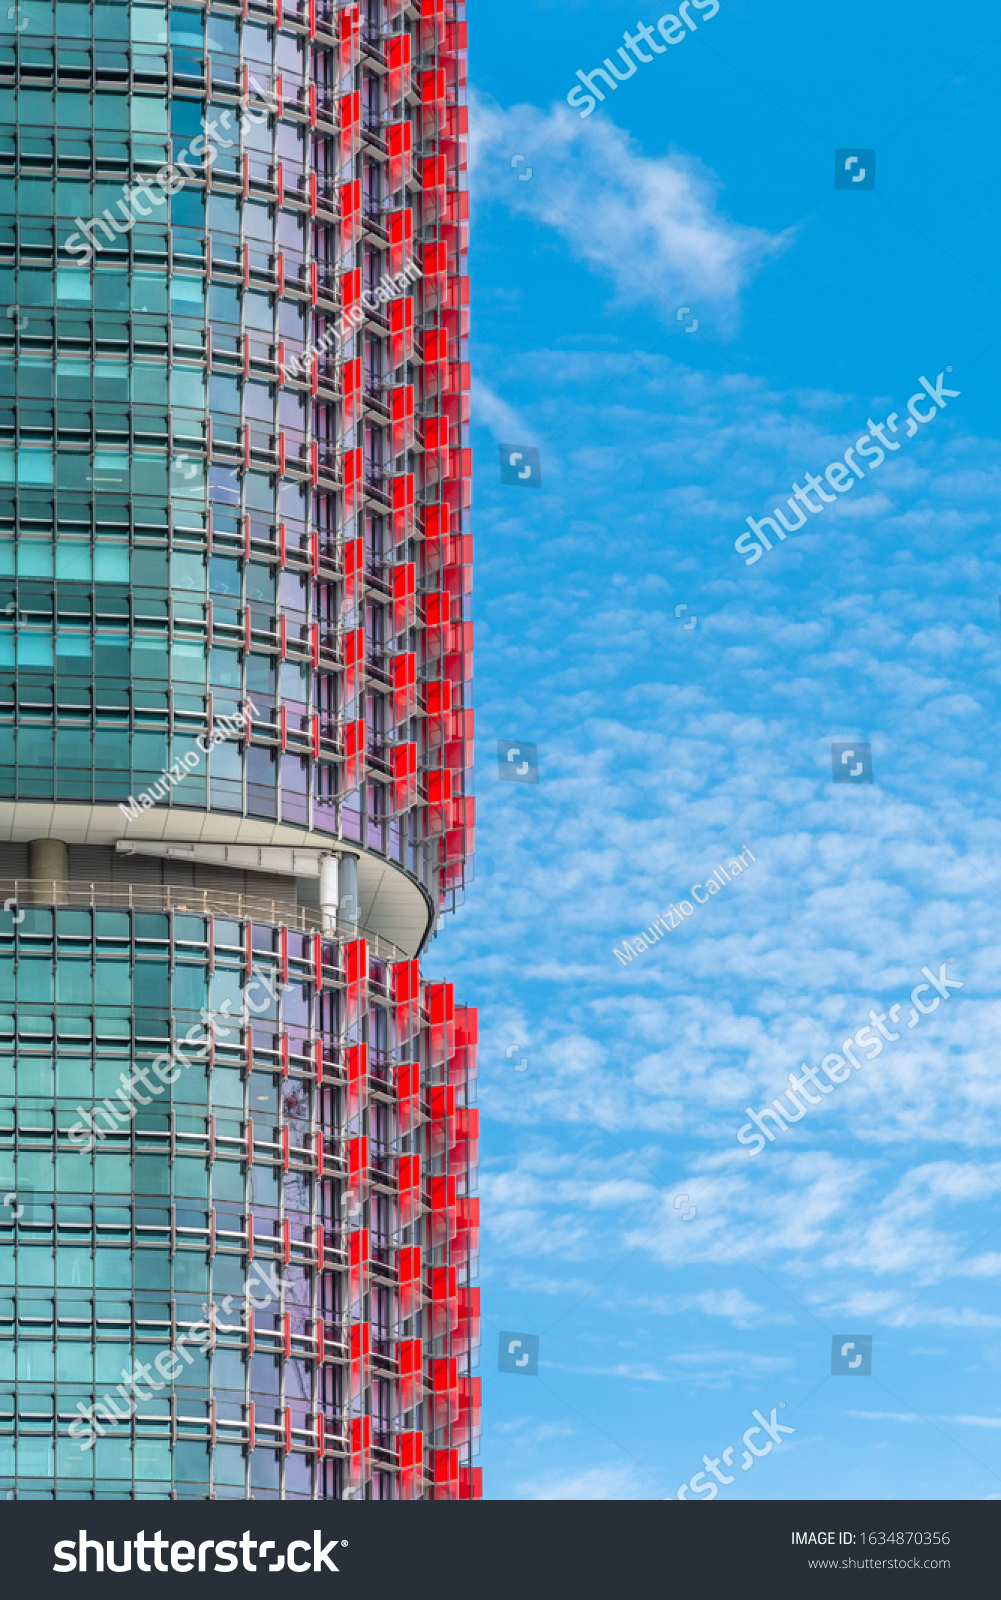 Close up of the International Towers in Sydney against a blue sky #1634870356